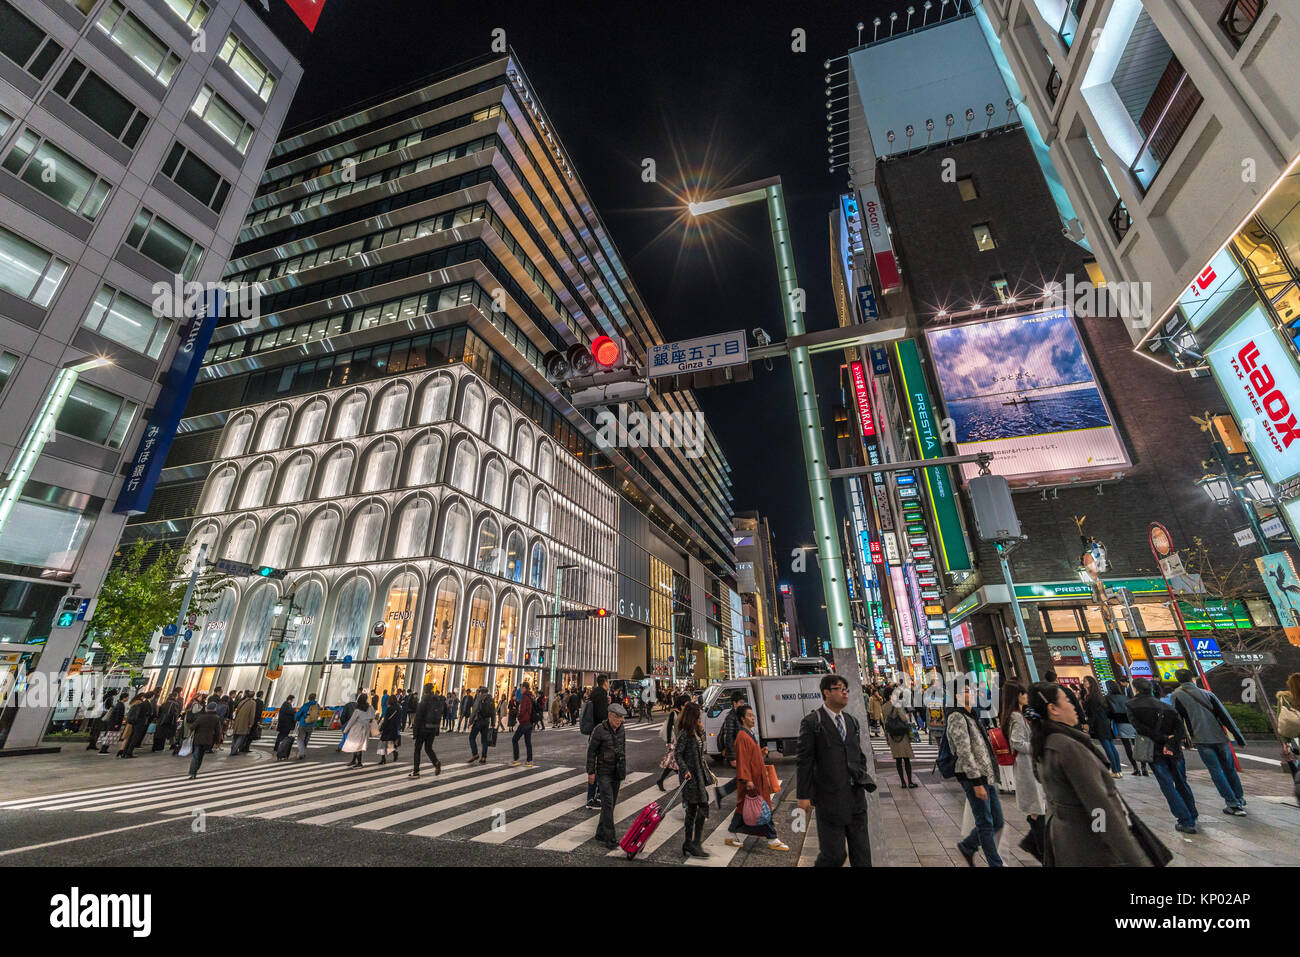 Ginza, Tokyo - December 2017 : Illuminated billboards in crowded Chuo dori street at Ginza luxurious shopping District by night. Stock Photo